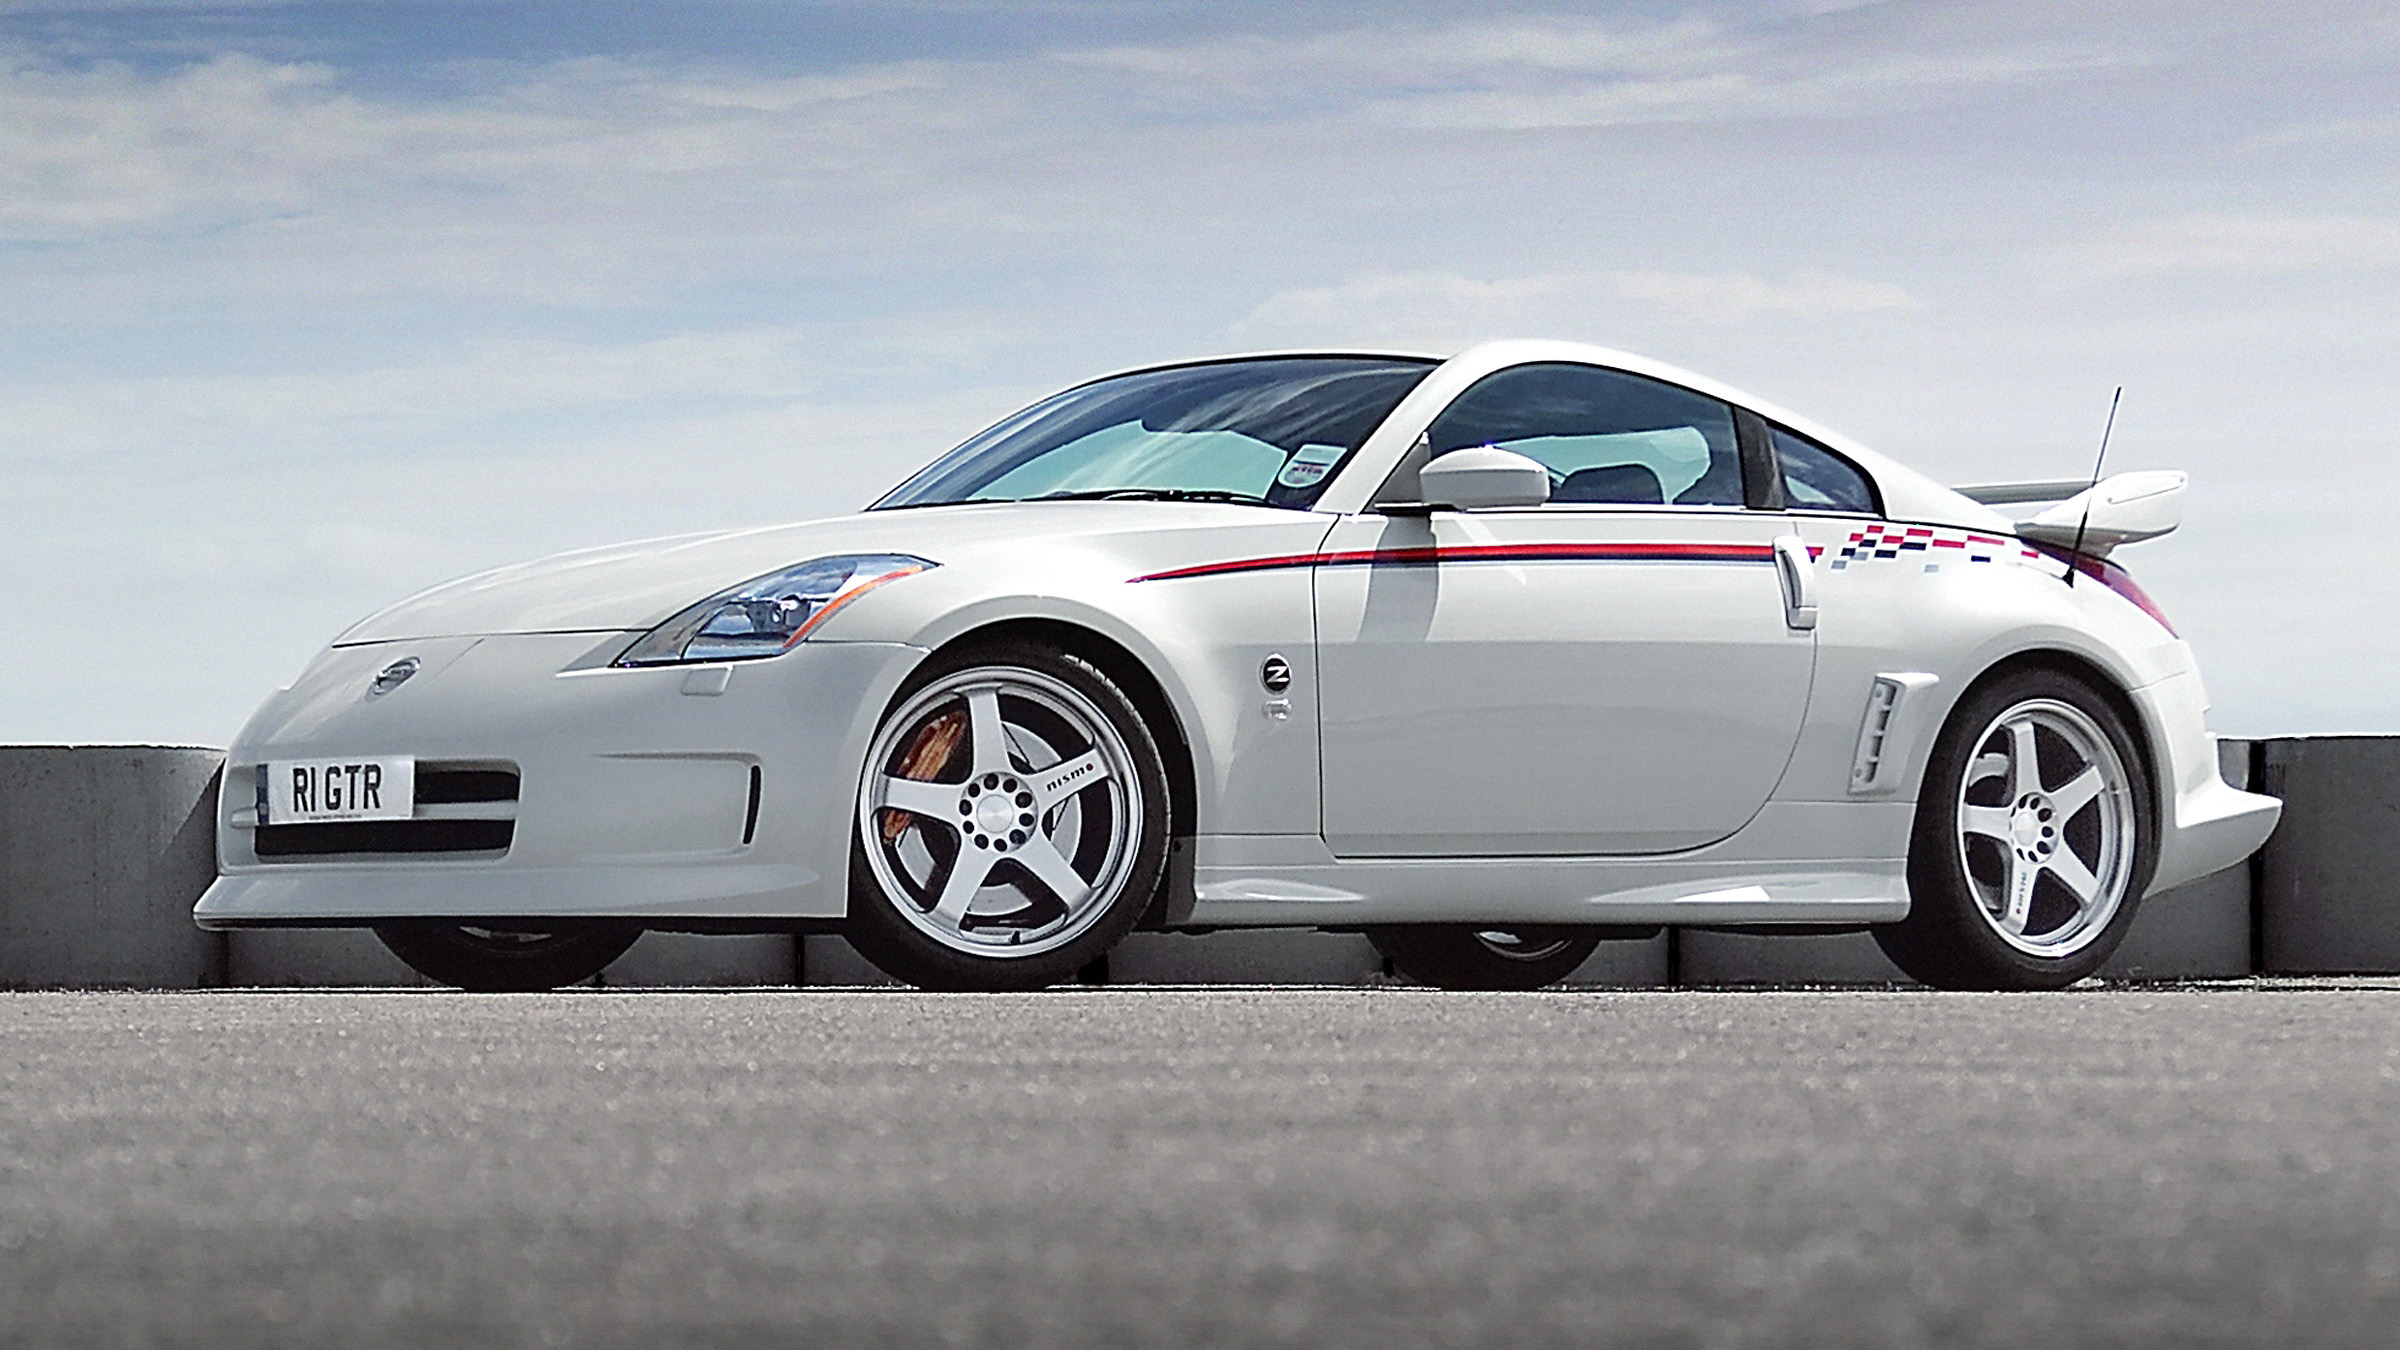 Retro review: the Nissan 350Z S-Tune GT Reviews 2023 | Top Gear